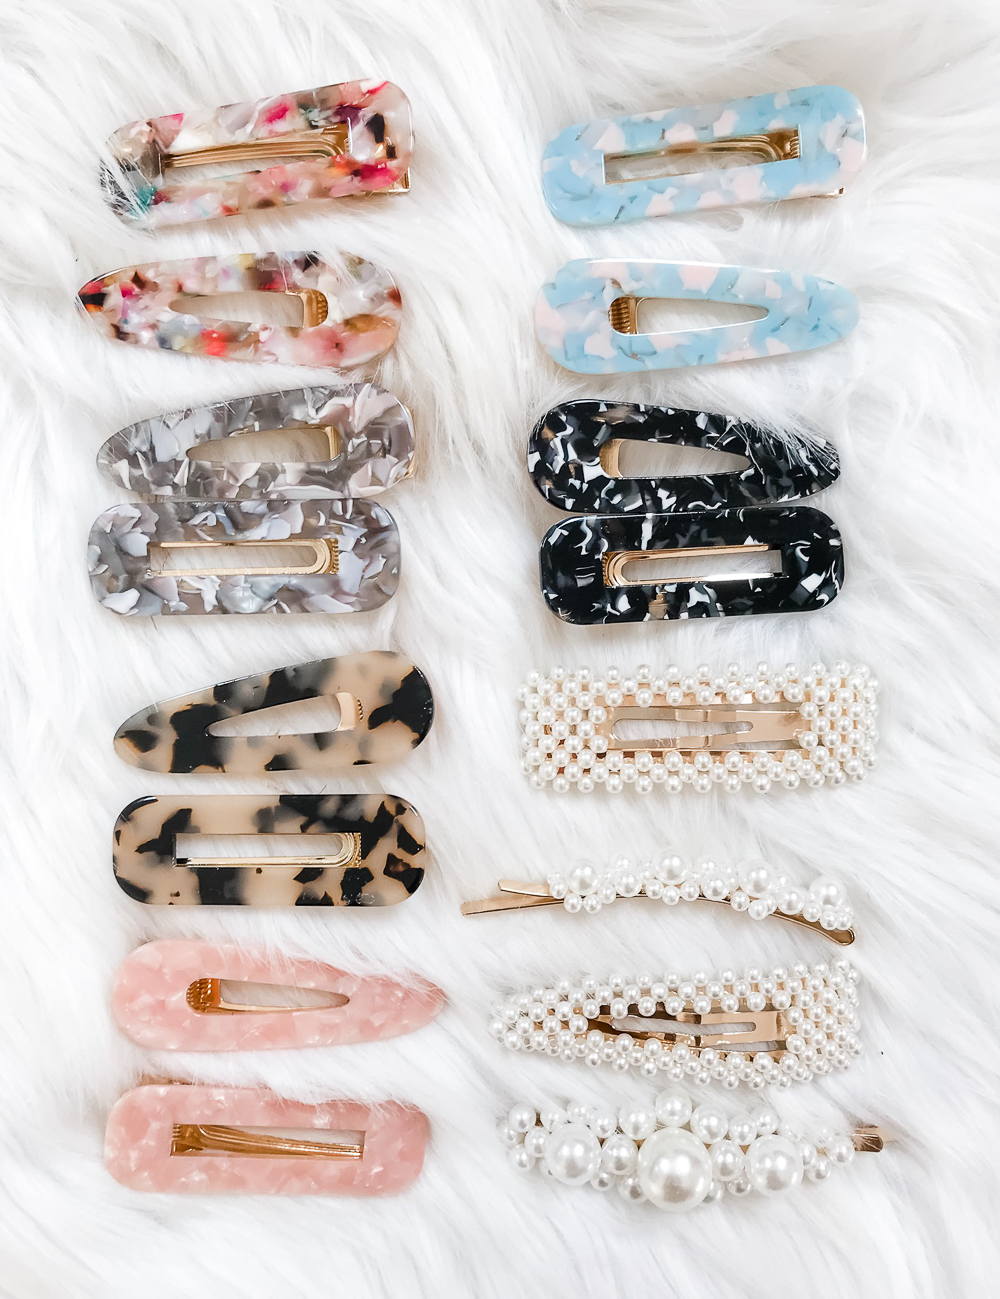 Amazon 16-Piece Hair Barrette Set, Amazon pearl hair barrettes, Amazon Prime Day Try-On Haul: Top Affordable Fashion Finds